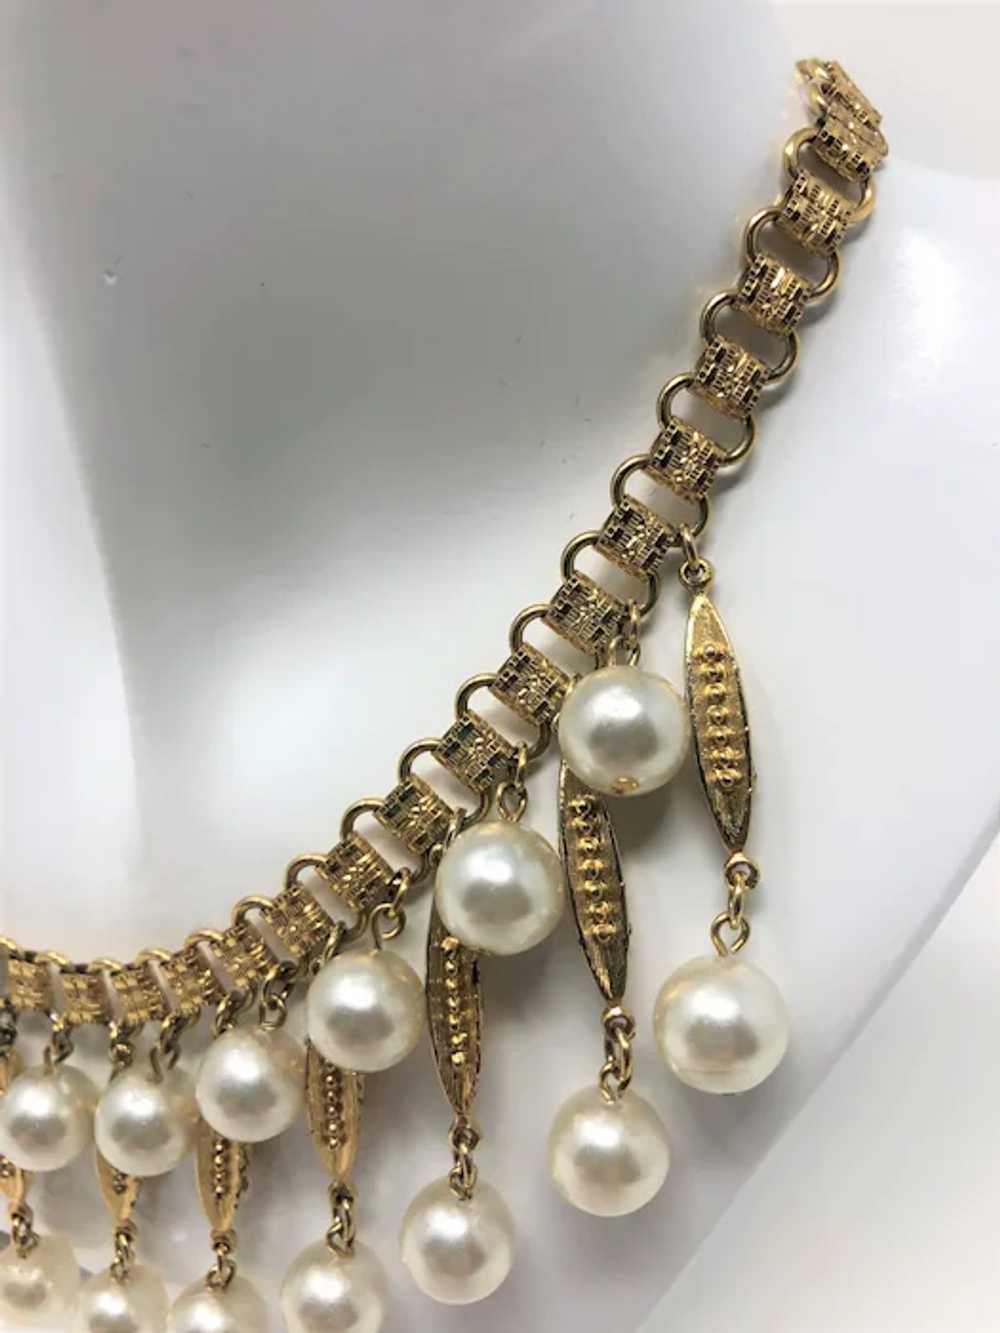 Beautiful Coro 60's Faux Pearl Necklace - image 4